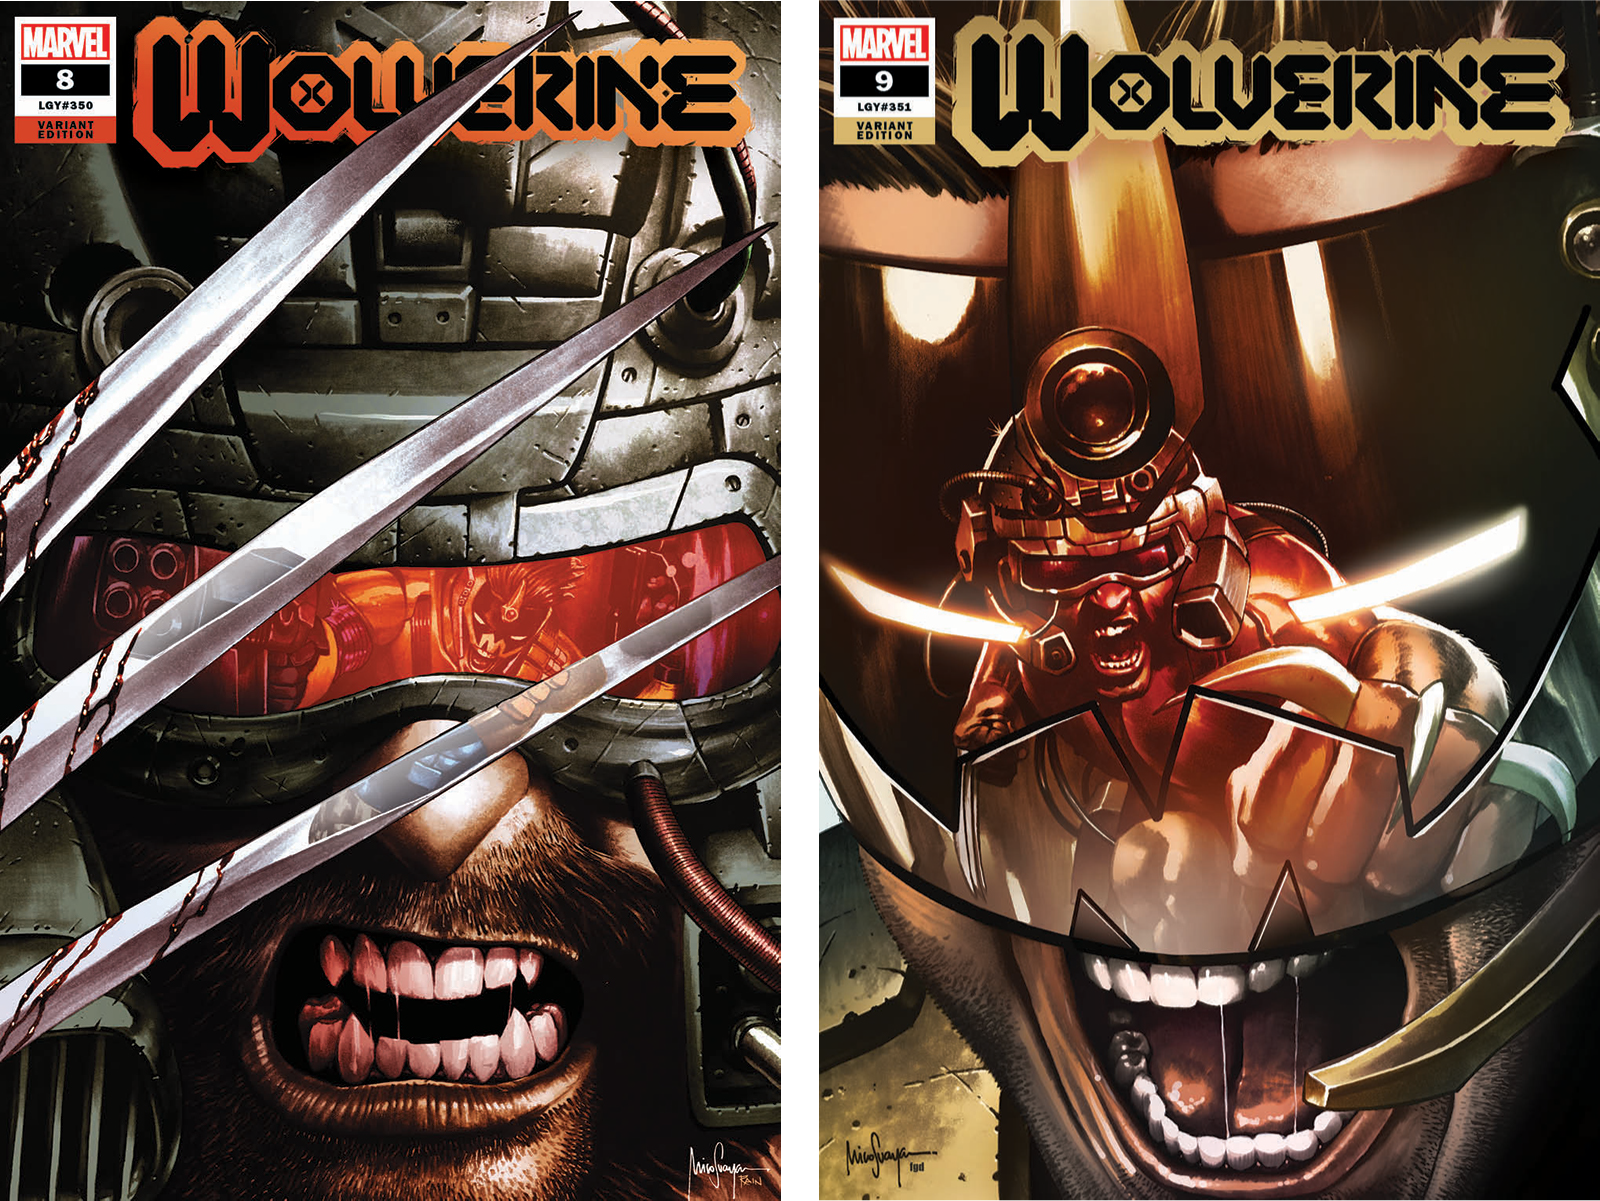 WOLVERINE #8 #9 UNKNOWN COMICS MICO SUAYAN EXCLUSIVE VAR 2 PACK  (01/27/2021)